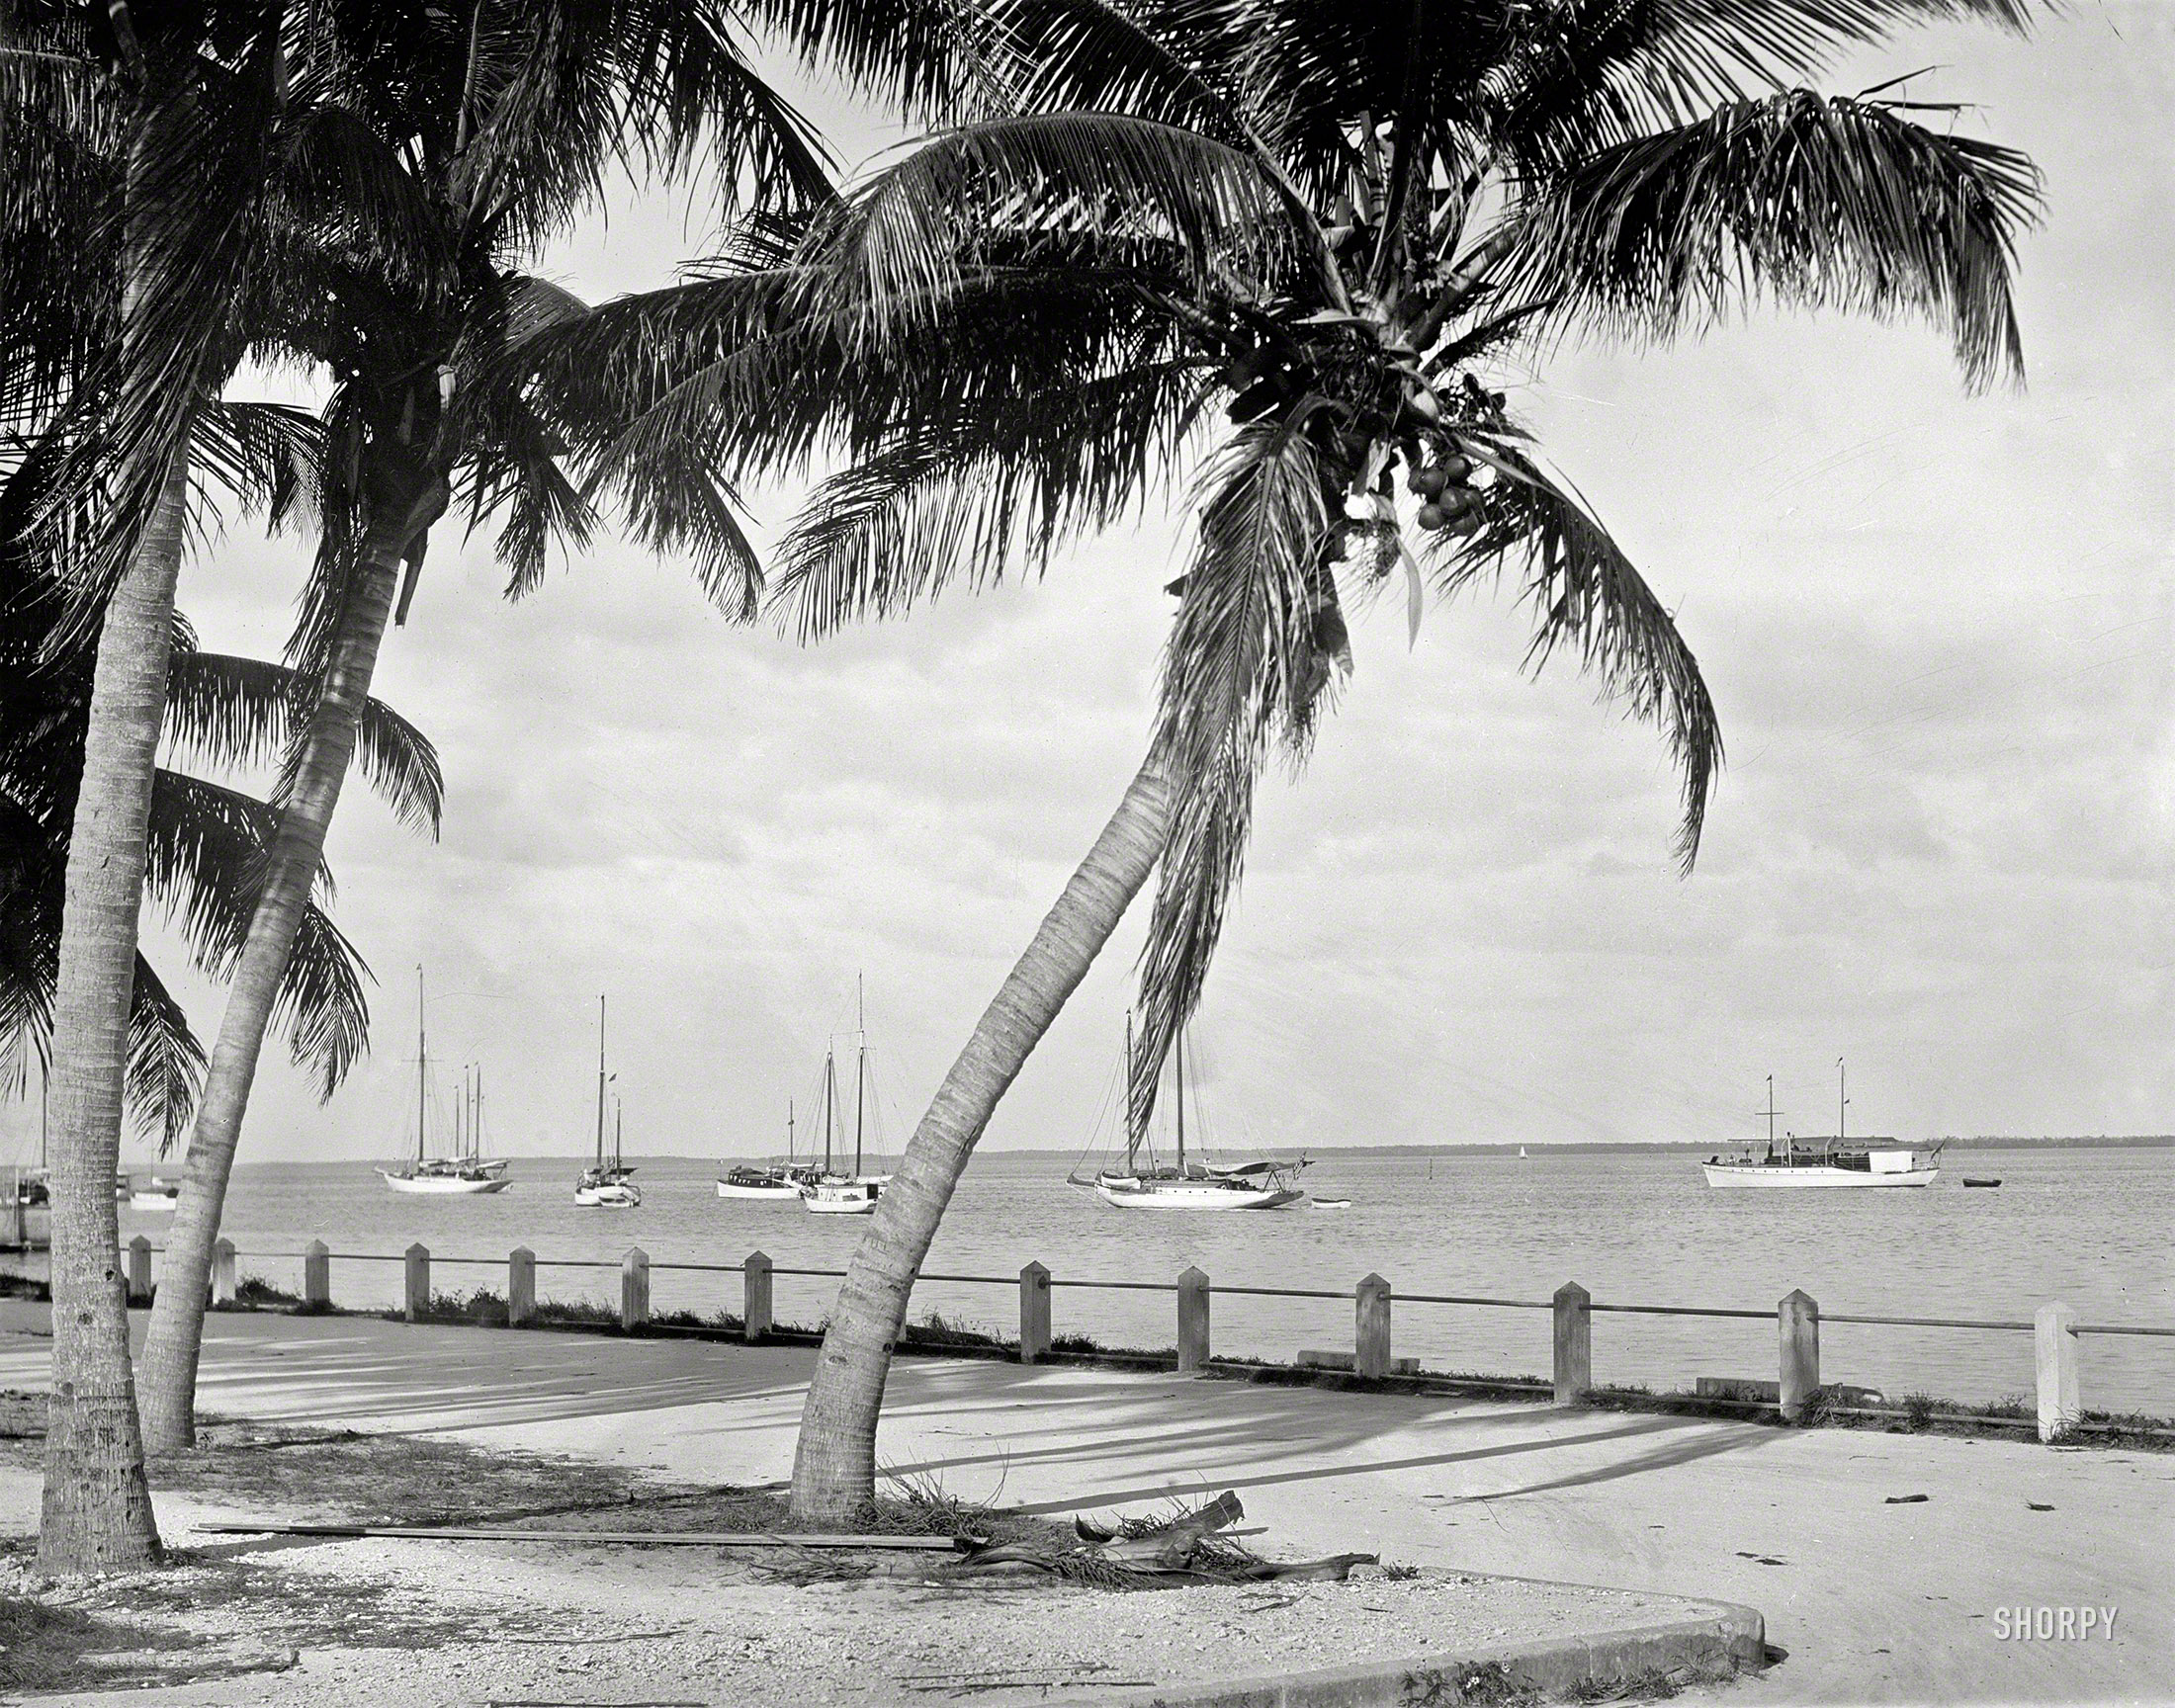 Florida circa 1912. "Biscayne Bay, Miami." Back when the highrises were mostly trees. 8x10 inch glass negative, Detroit Publishing Company. View full size.